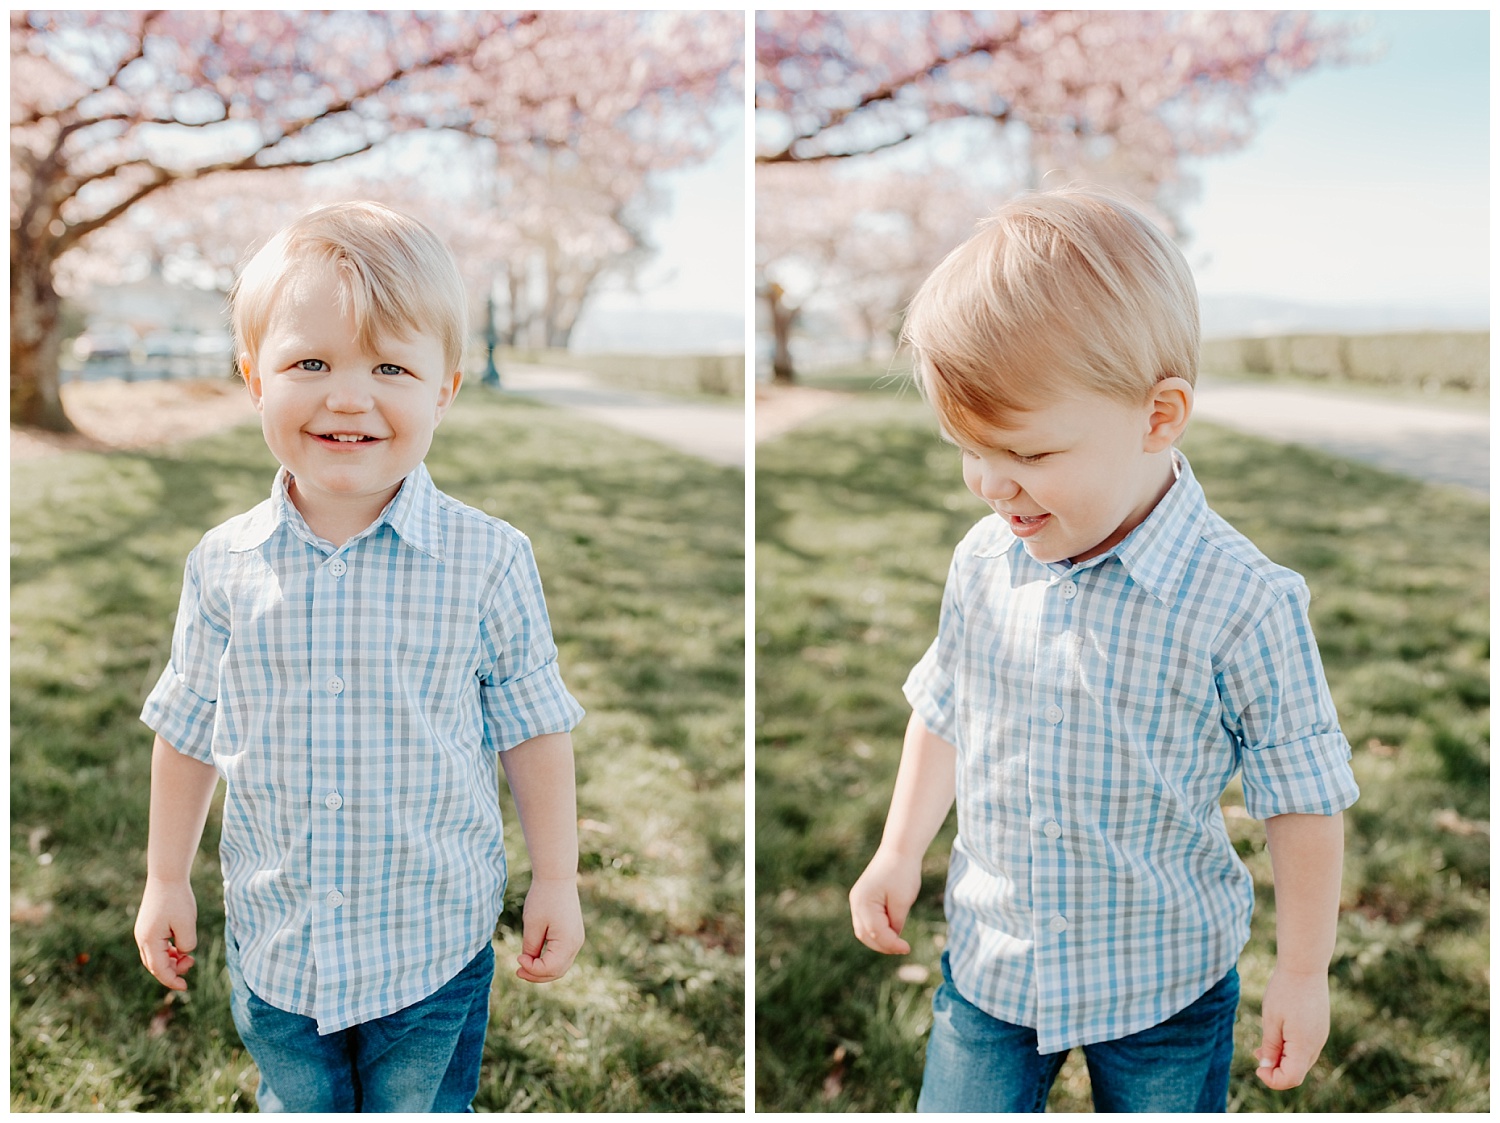 spring blossom family pictures at Grand Avenue, Everett Washington + Snohomish Family Photographer